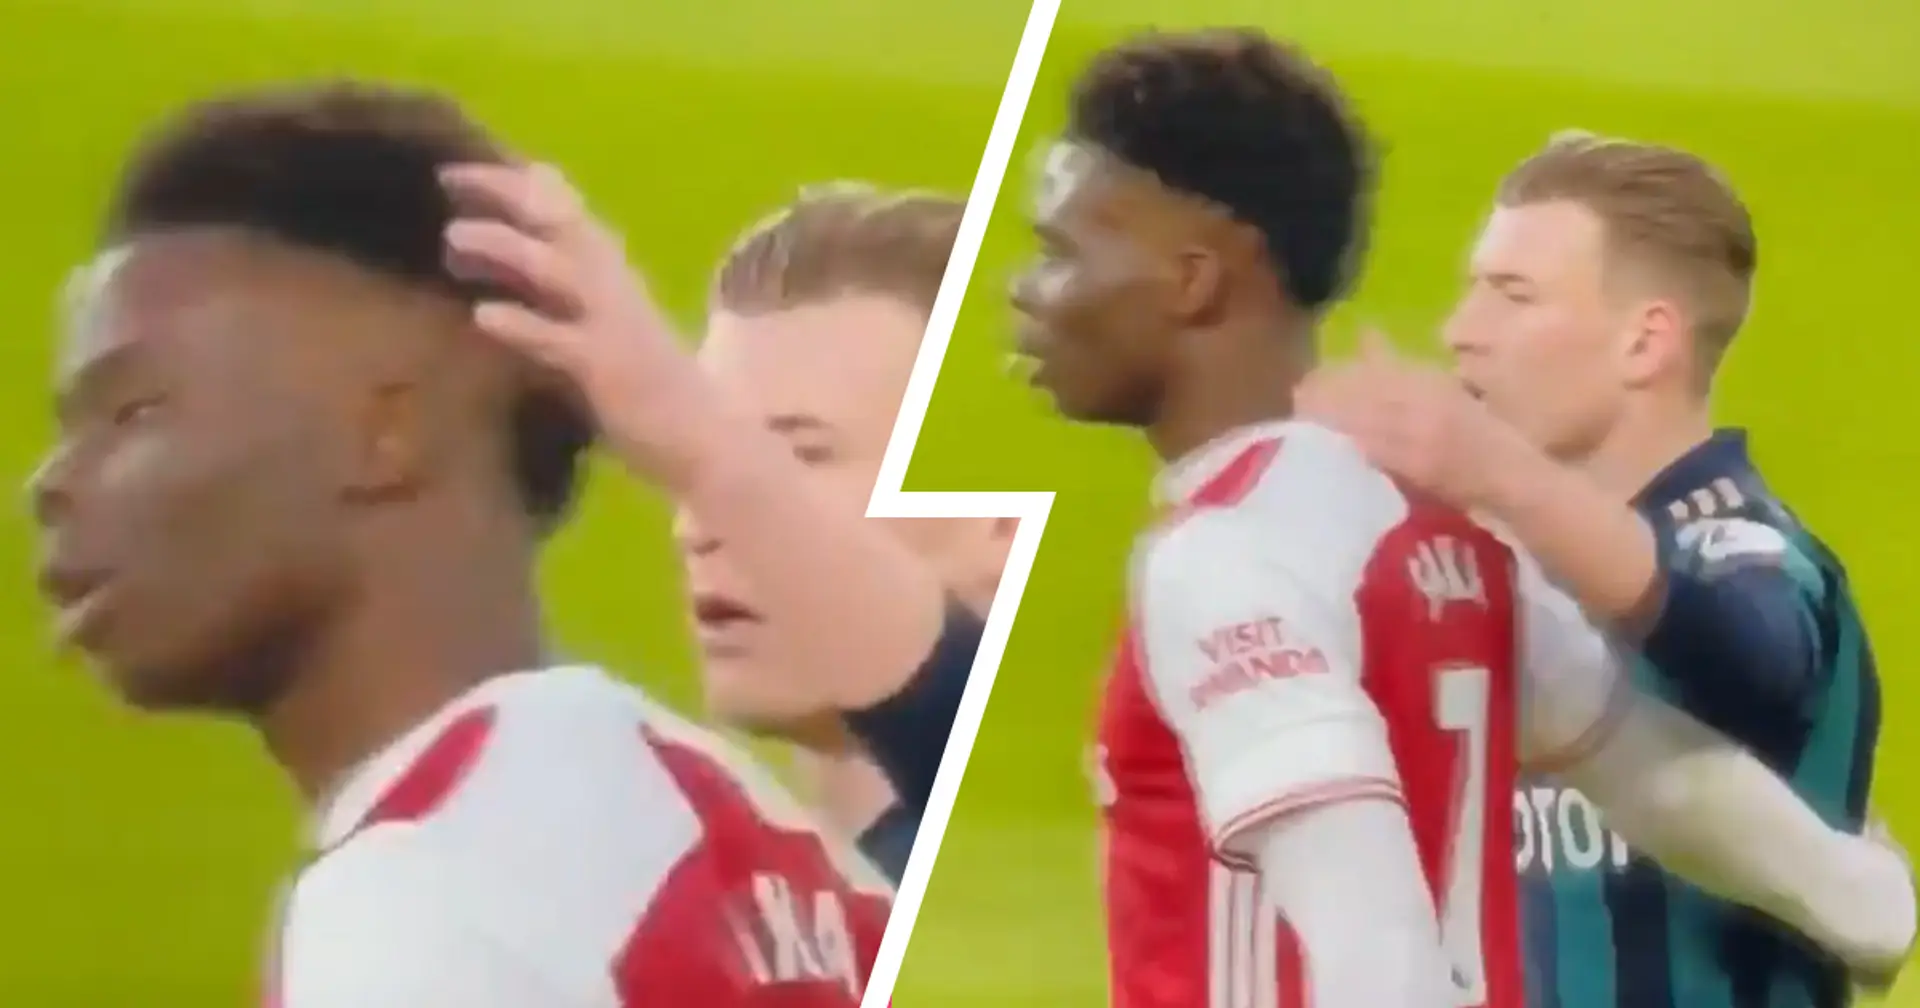 Saka totally unfazed as Alioski tried to wind him up during Leeds game